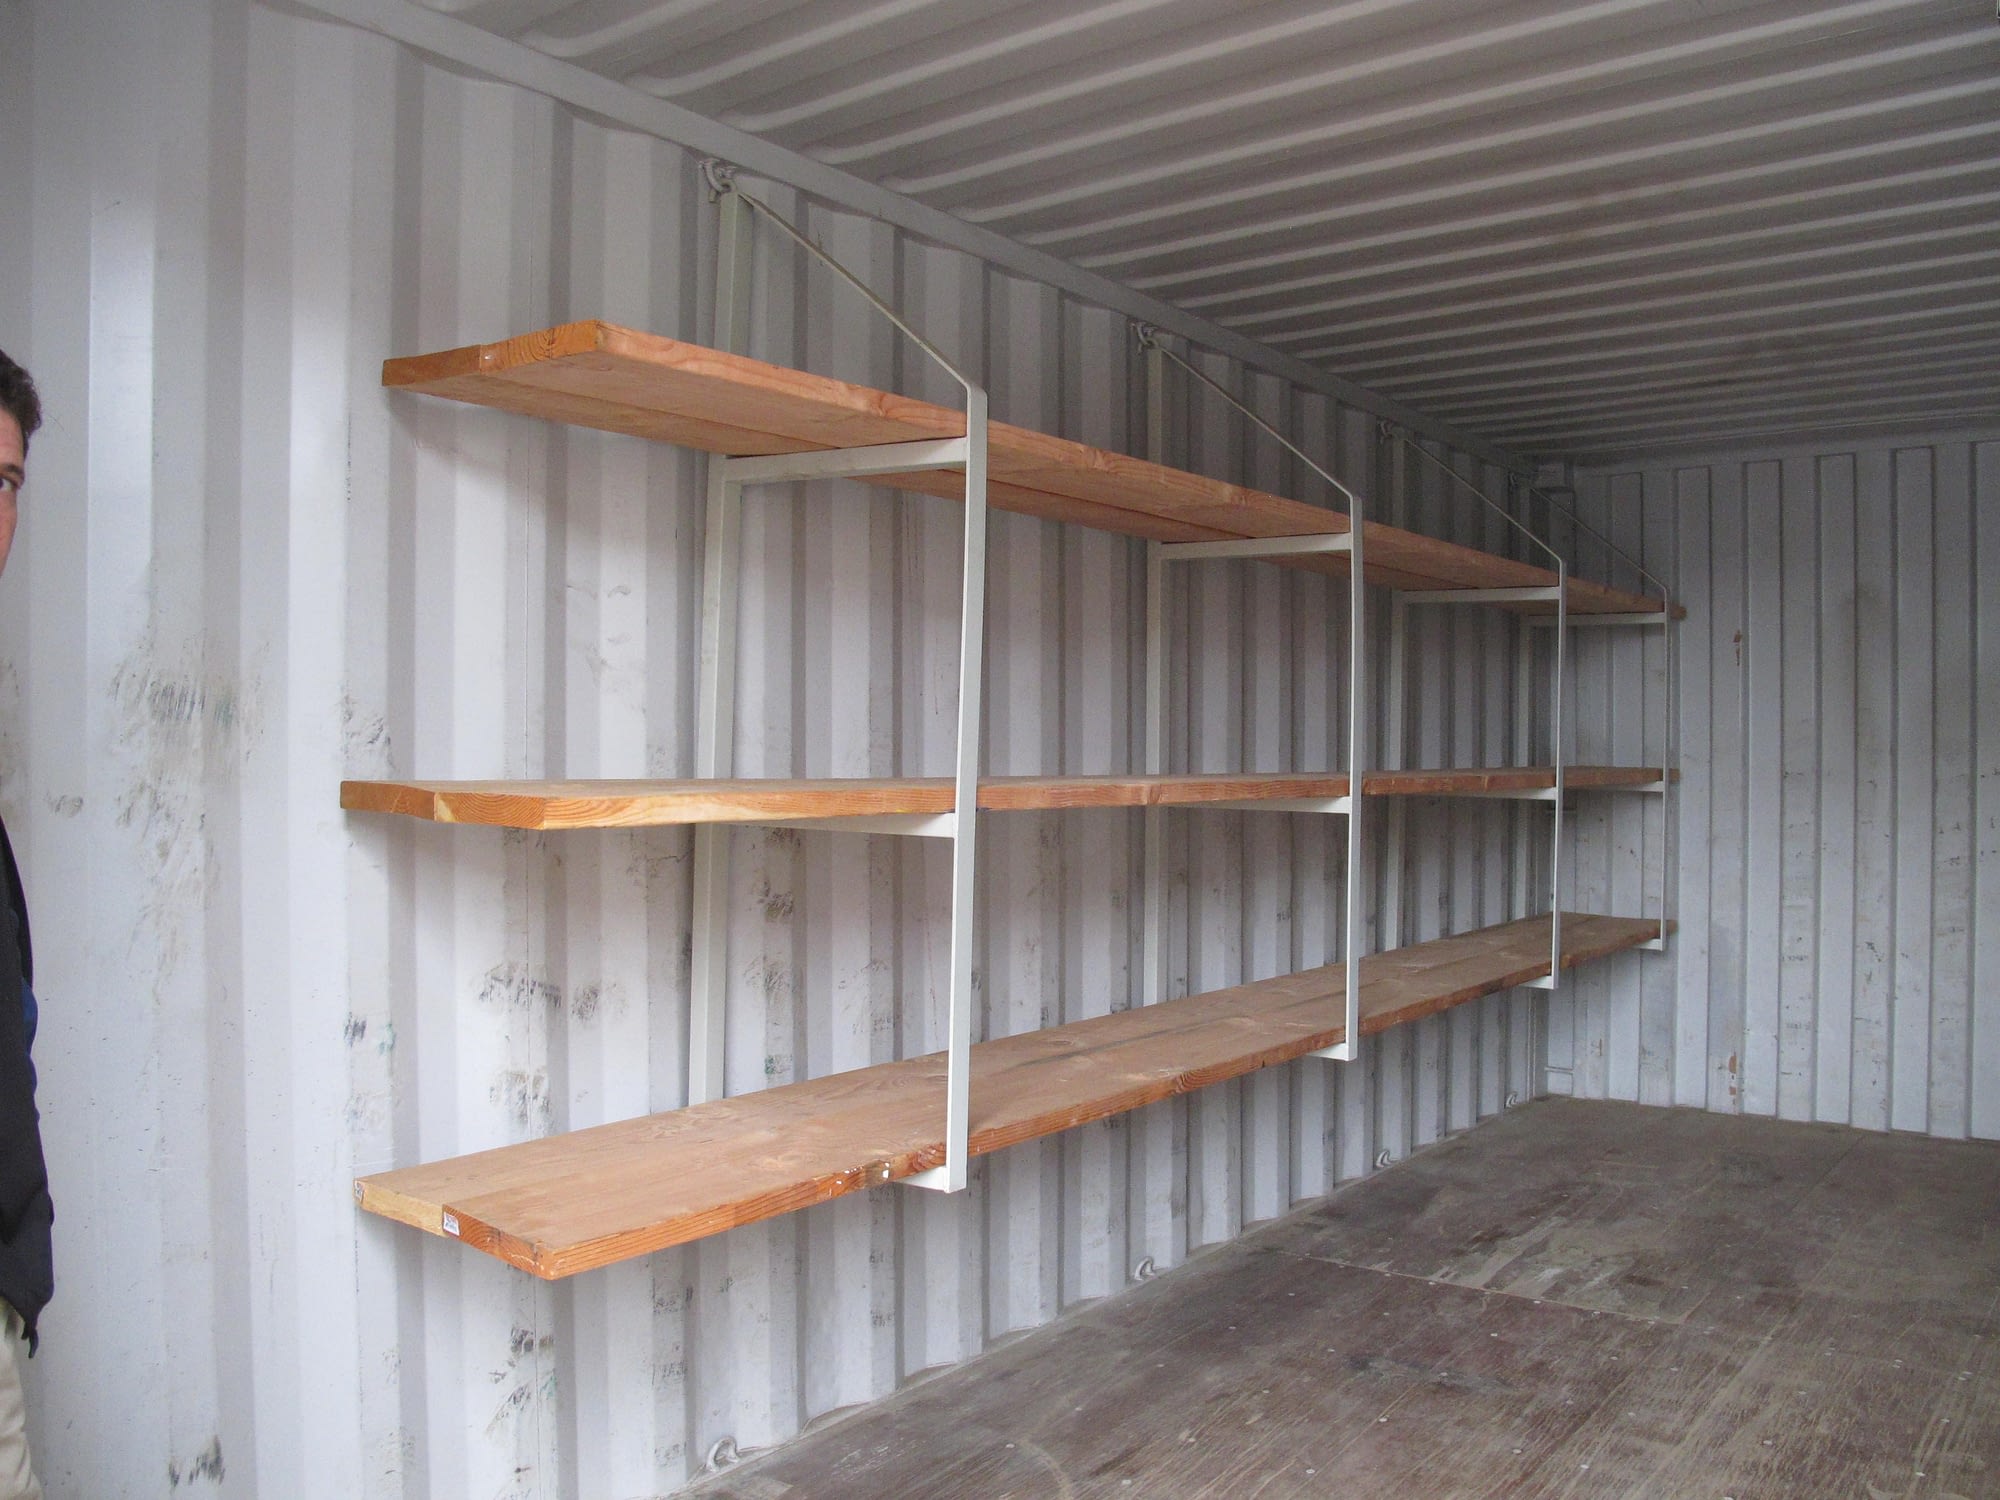 TRS offers storage shelves for sale or rent to organize your materials.